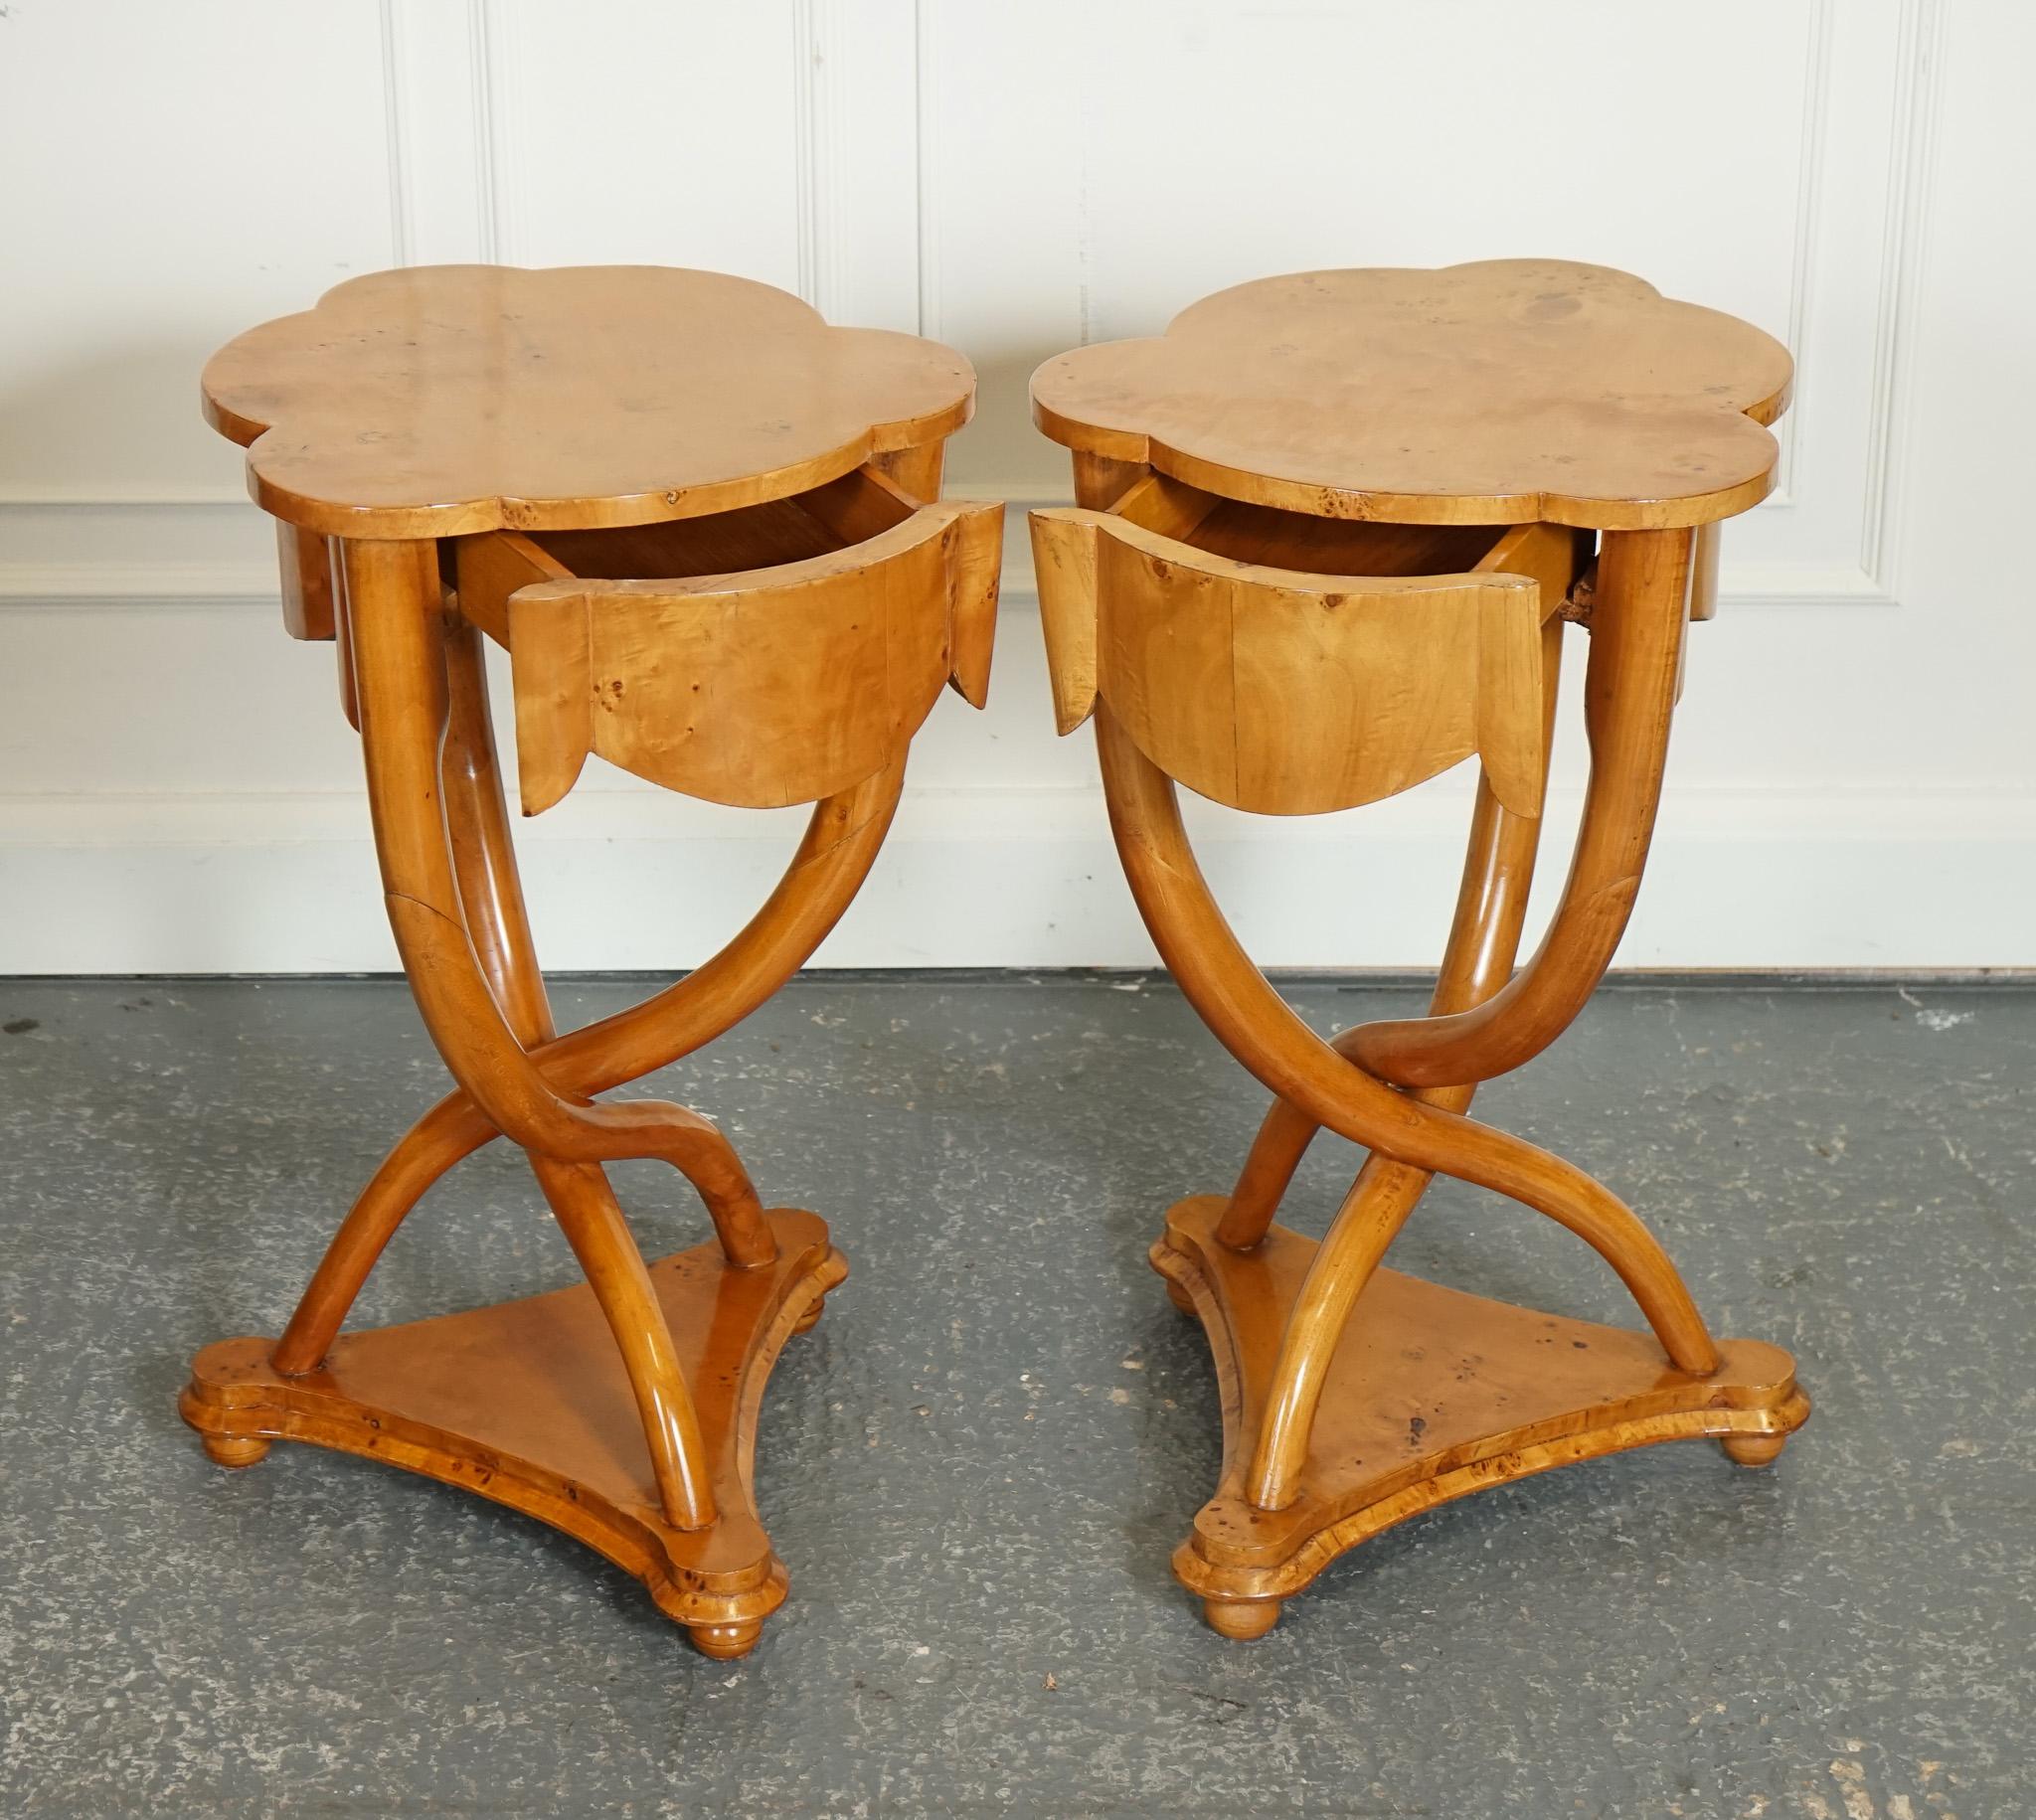 
We are delighted to offer for sale this Pair Of Art Deco Style Walnut Occasional Bedside Tables.

The Pair of Art Deco Walnut Veneer On Hardwood Occasional Bedside Nightstand Tables with Curved Legs is a delightful set that reflects the elegance